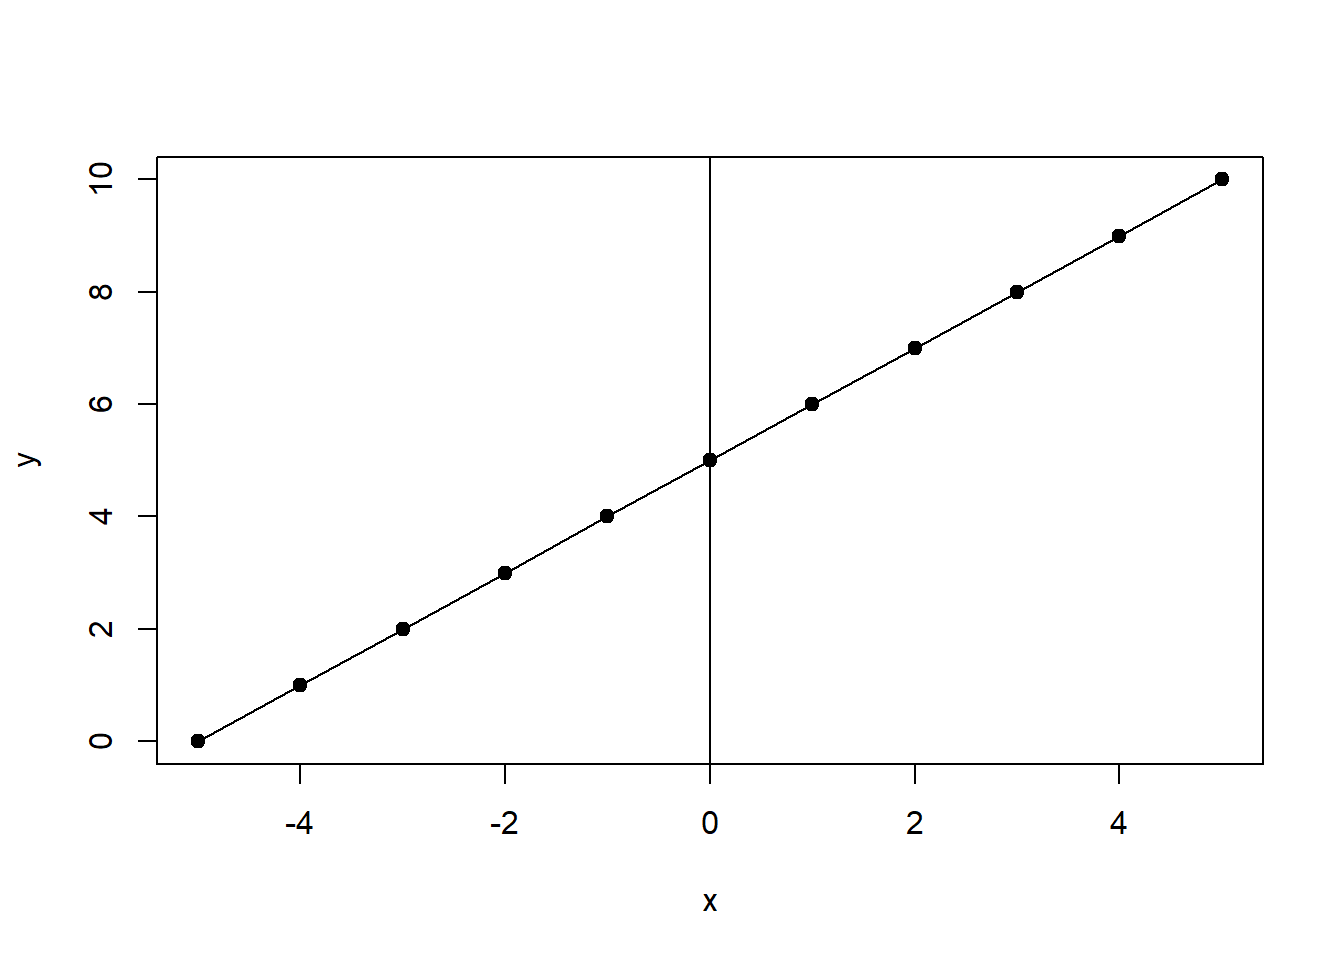 Liner Function $y=f(x)=5+x$